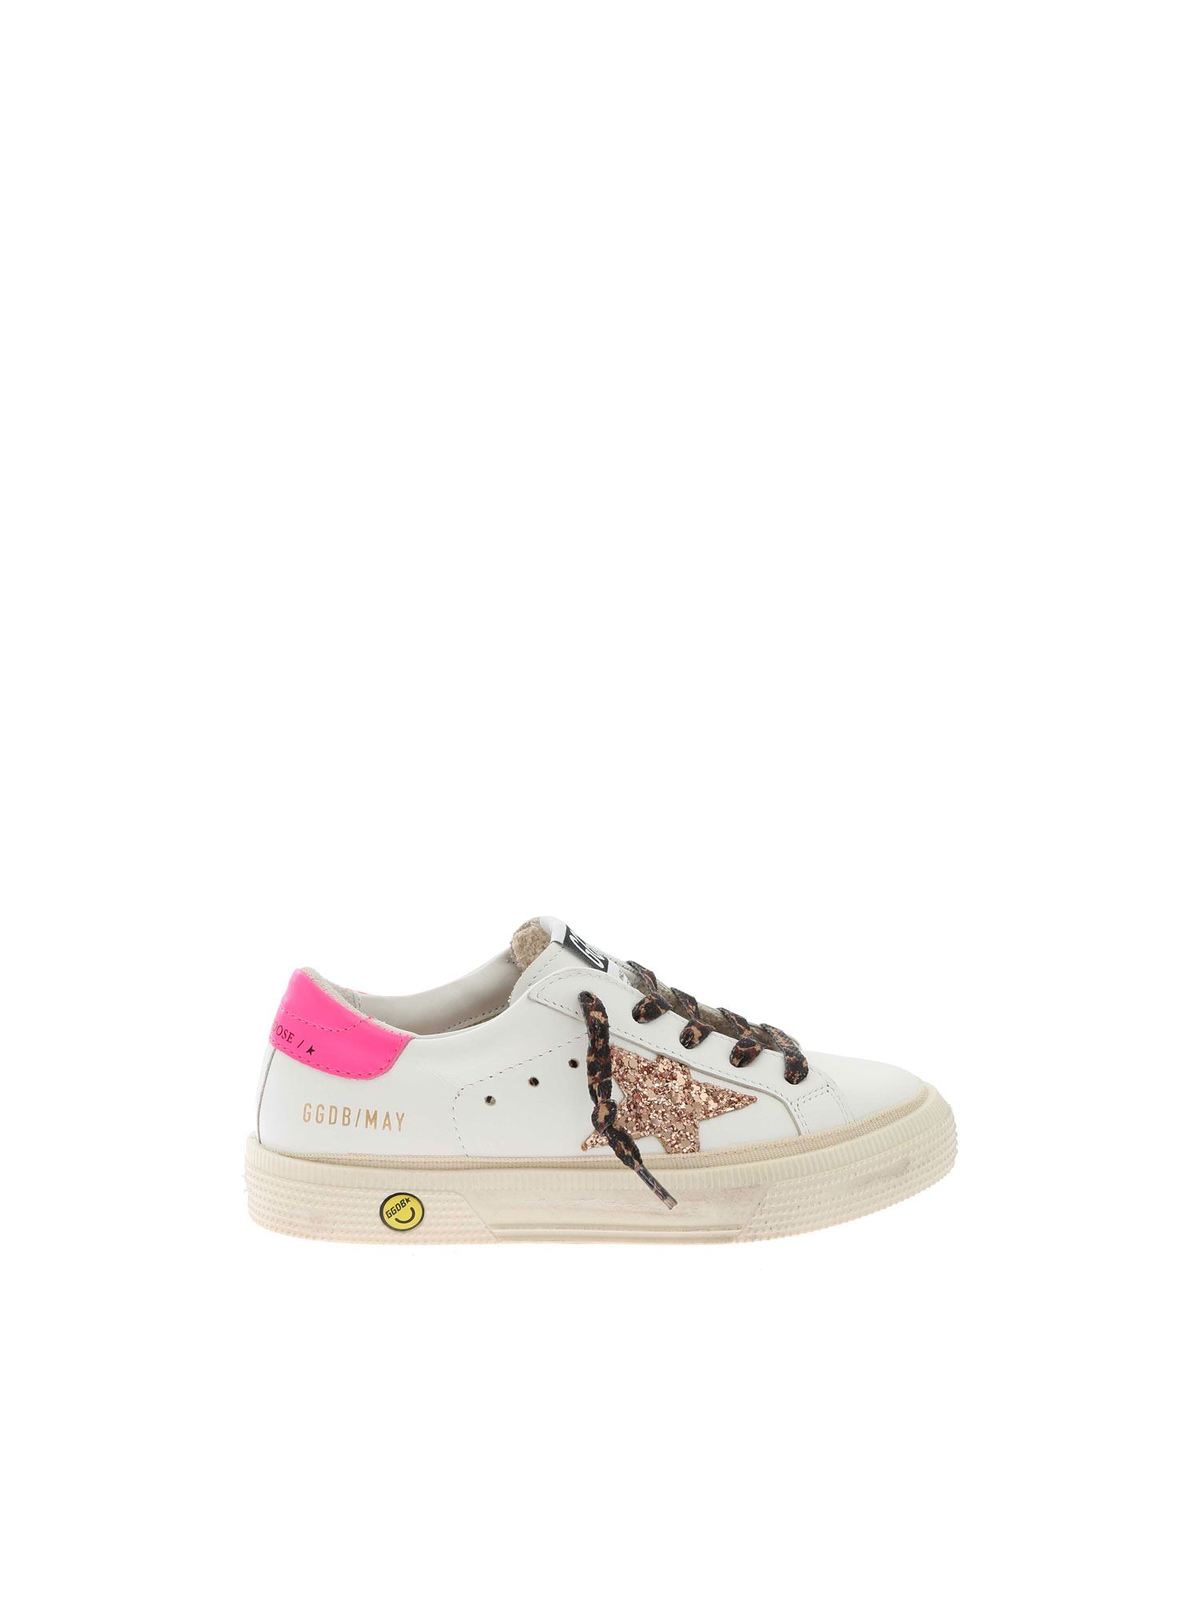 Golden Goose Kids' May Sneakers In White And Neon Pink